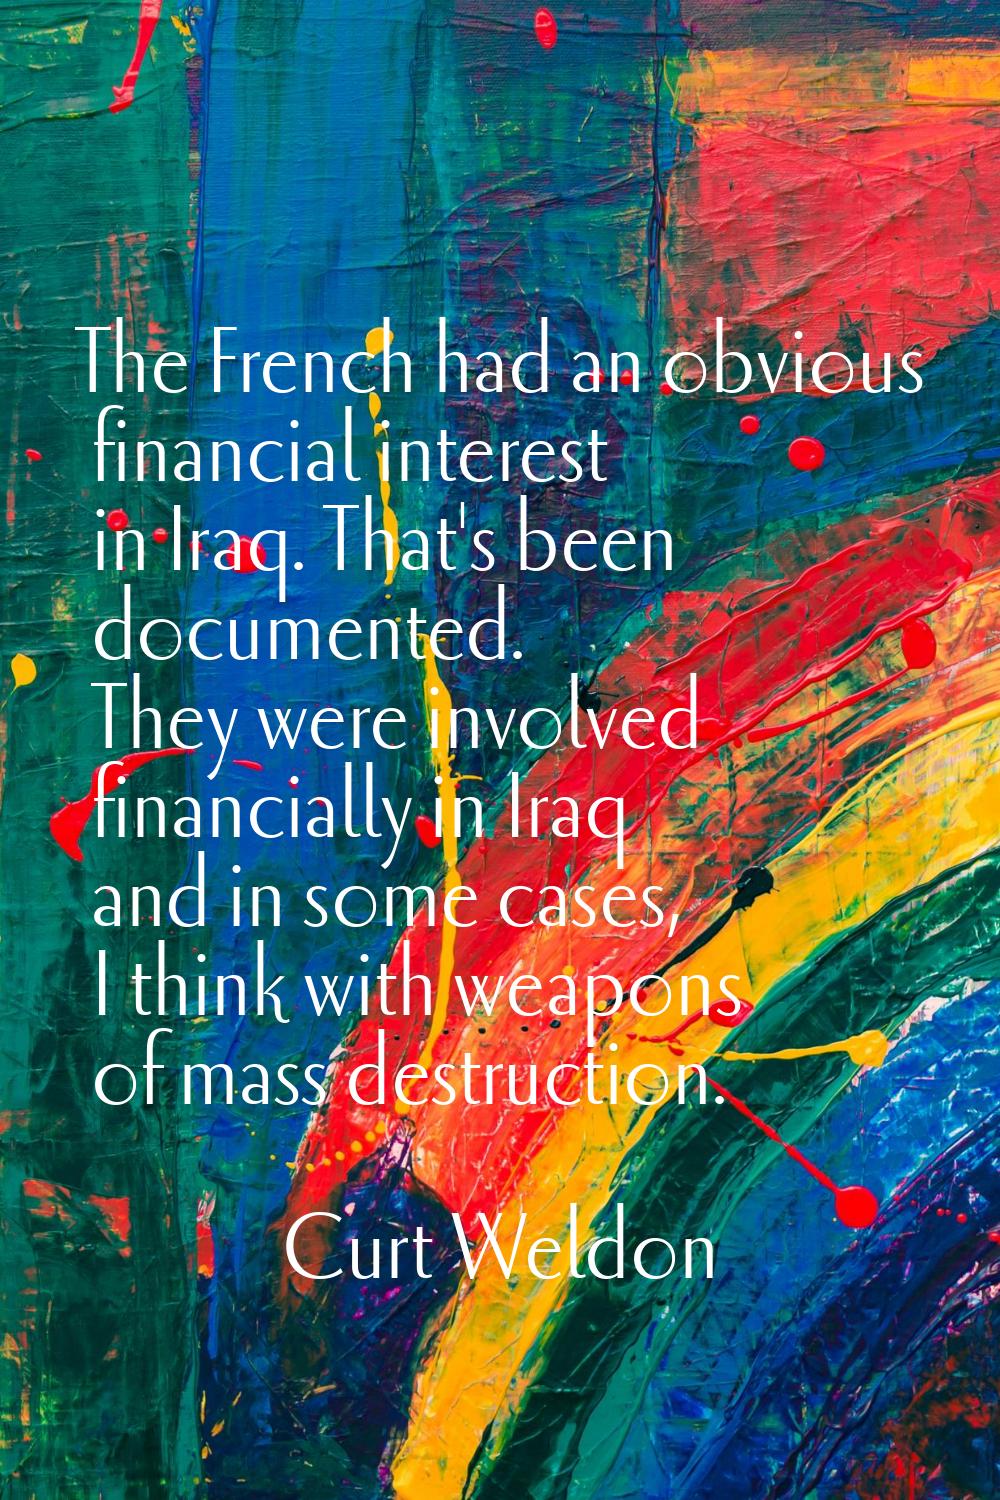 The French had an obvious financial interest in Iraq. That's been documented. They were involved fi